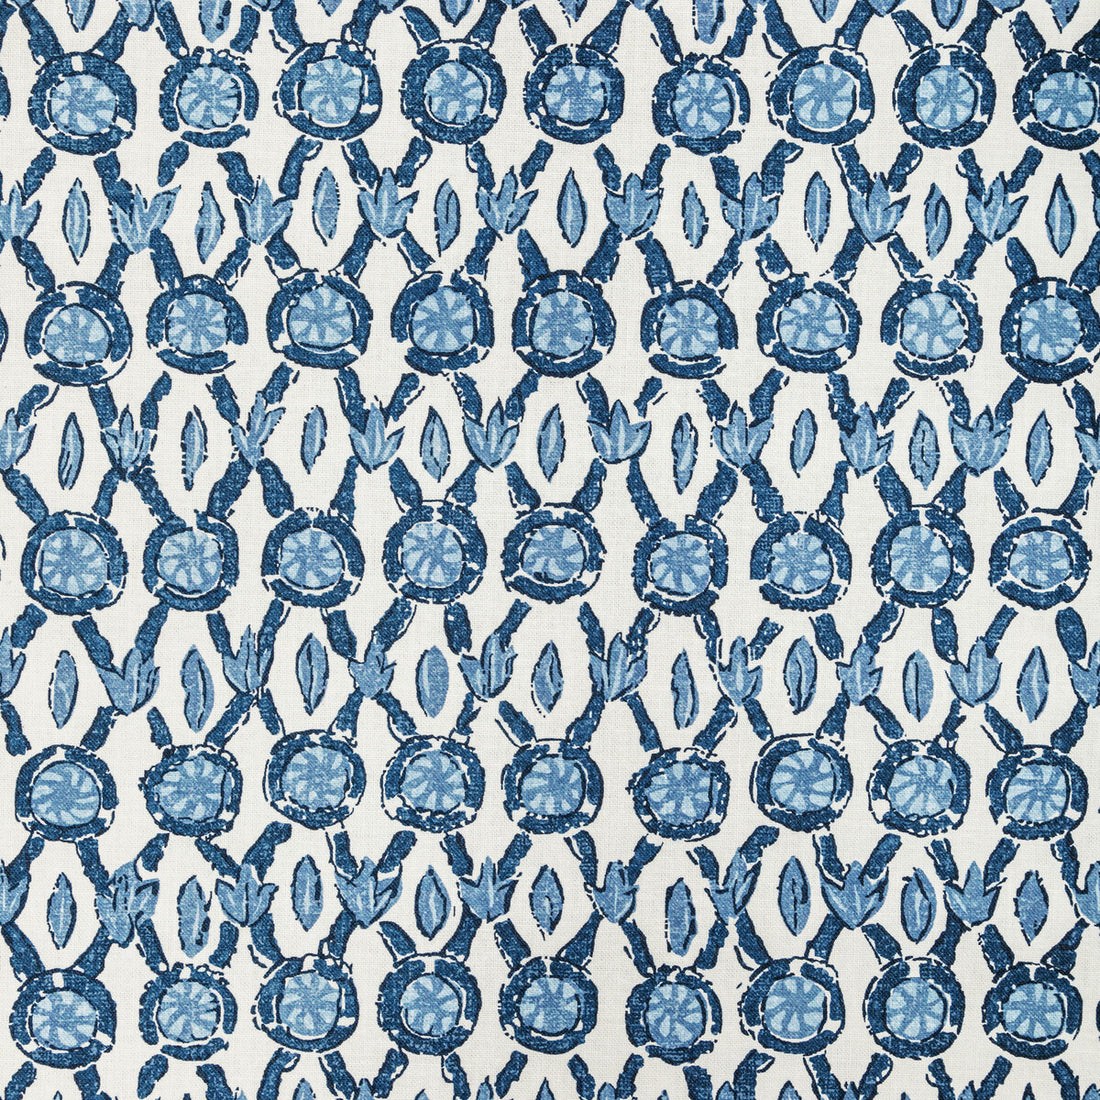 Galon Print fabric in blue color - pattern 8022103.55.0 - by Brunschwig &amp; Fils in the Manoir collection